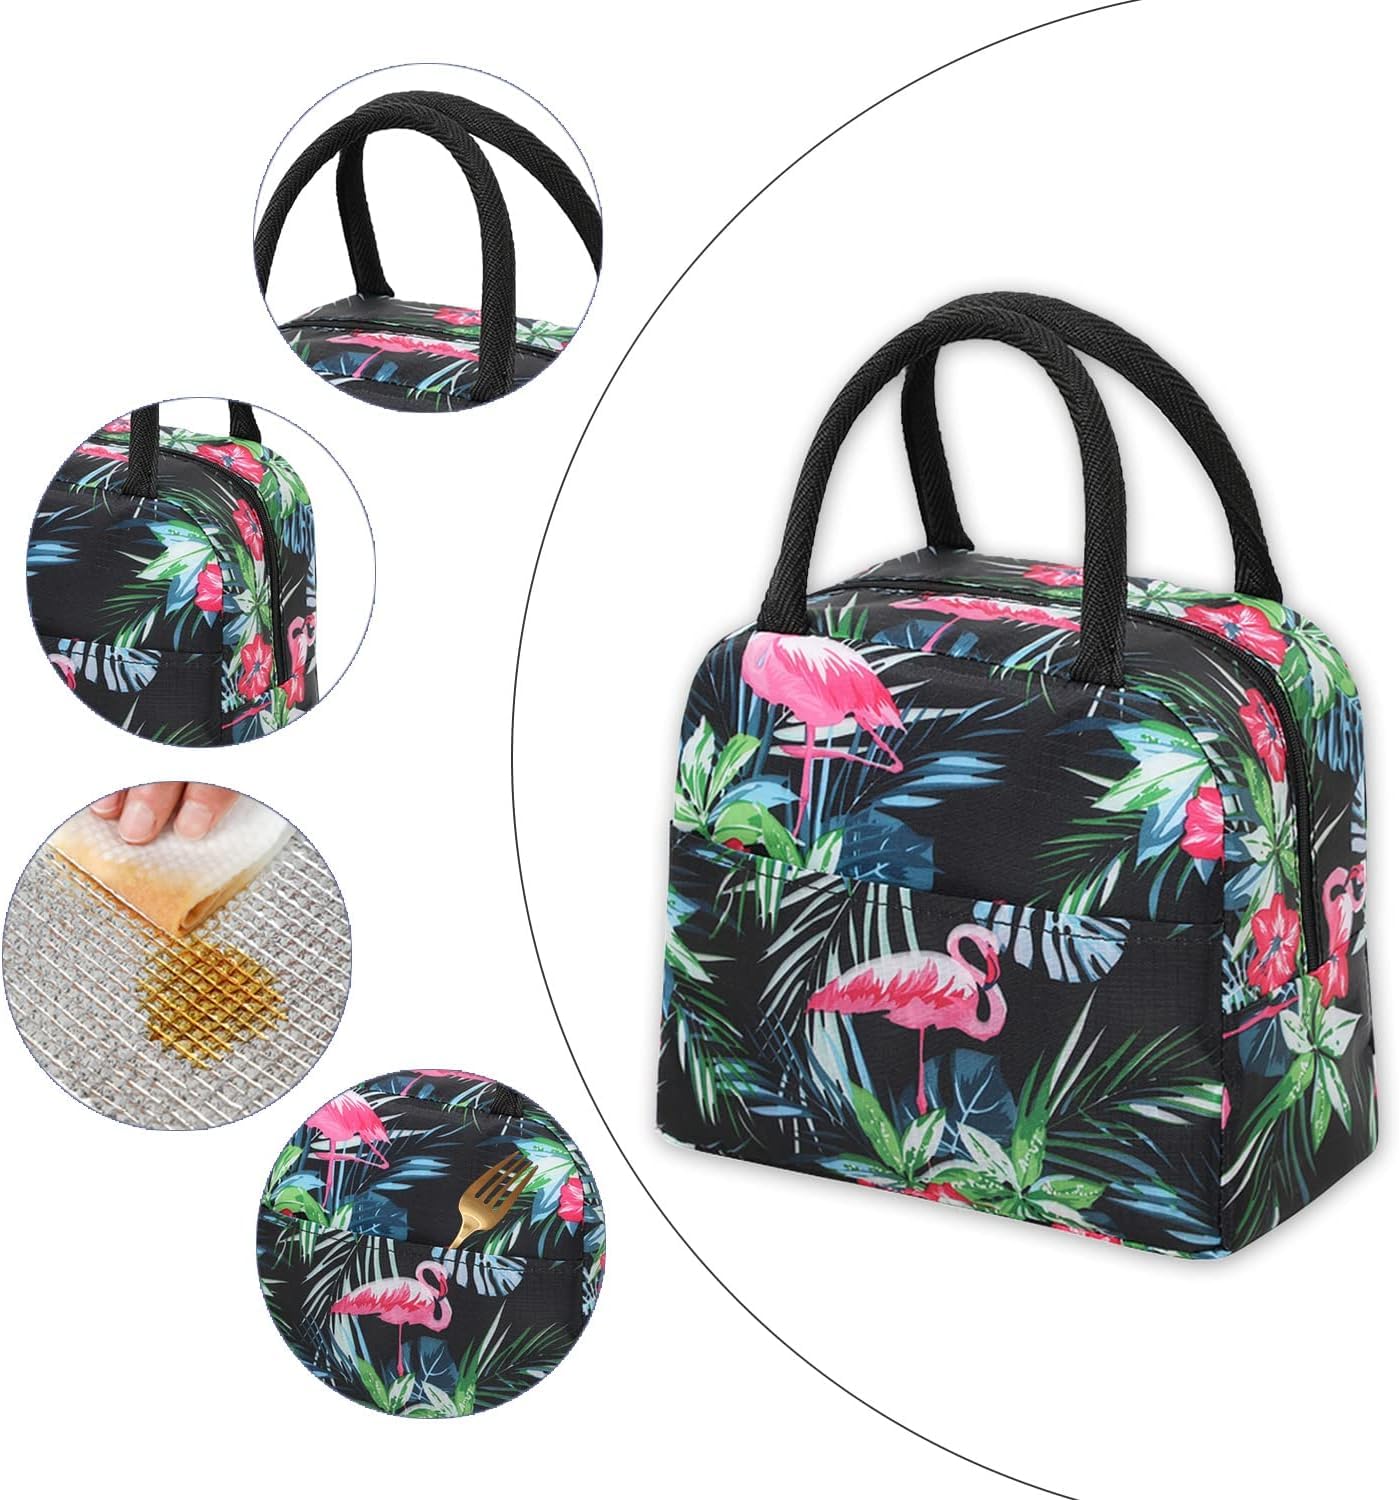 Insulated Lunch Bag (Black Flamingo)